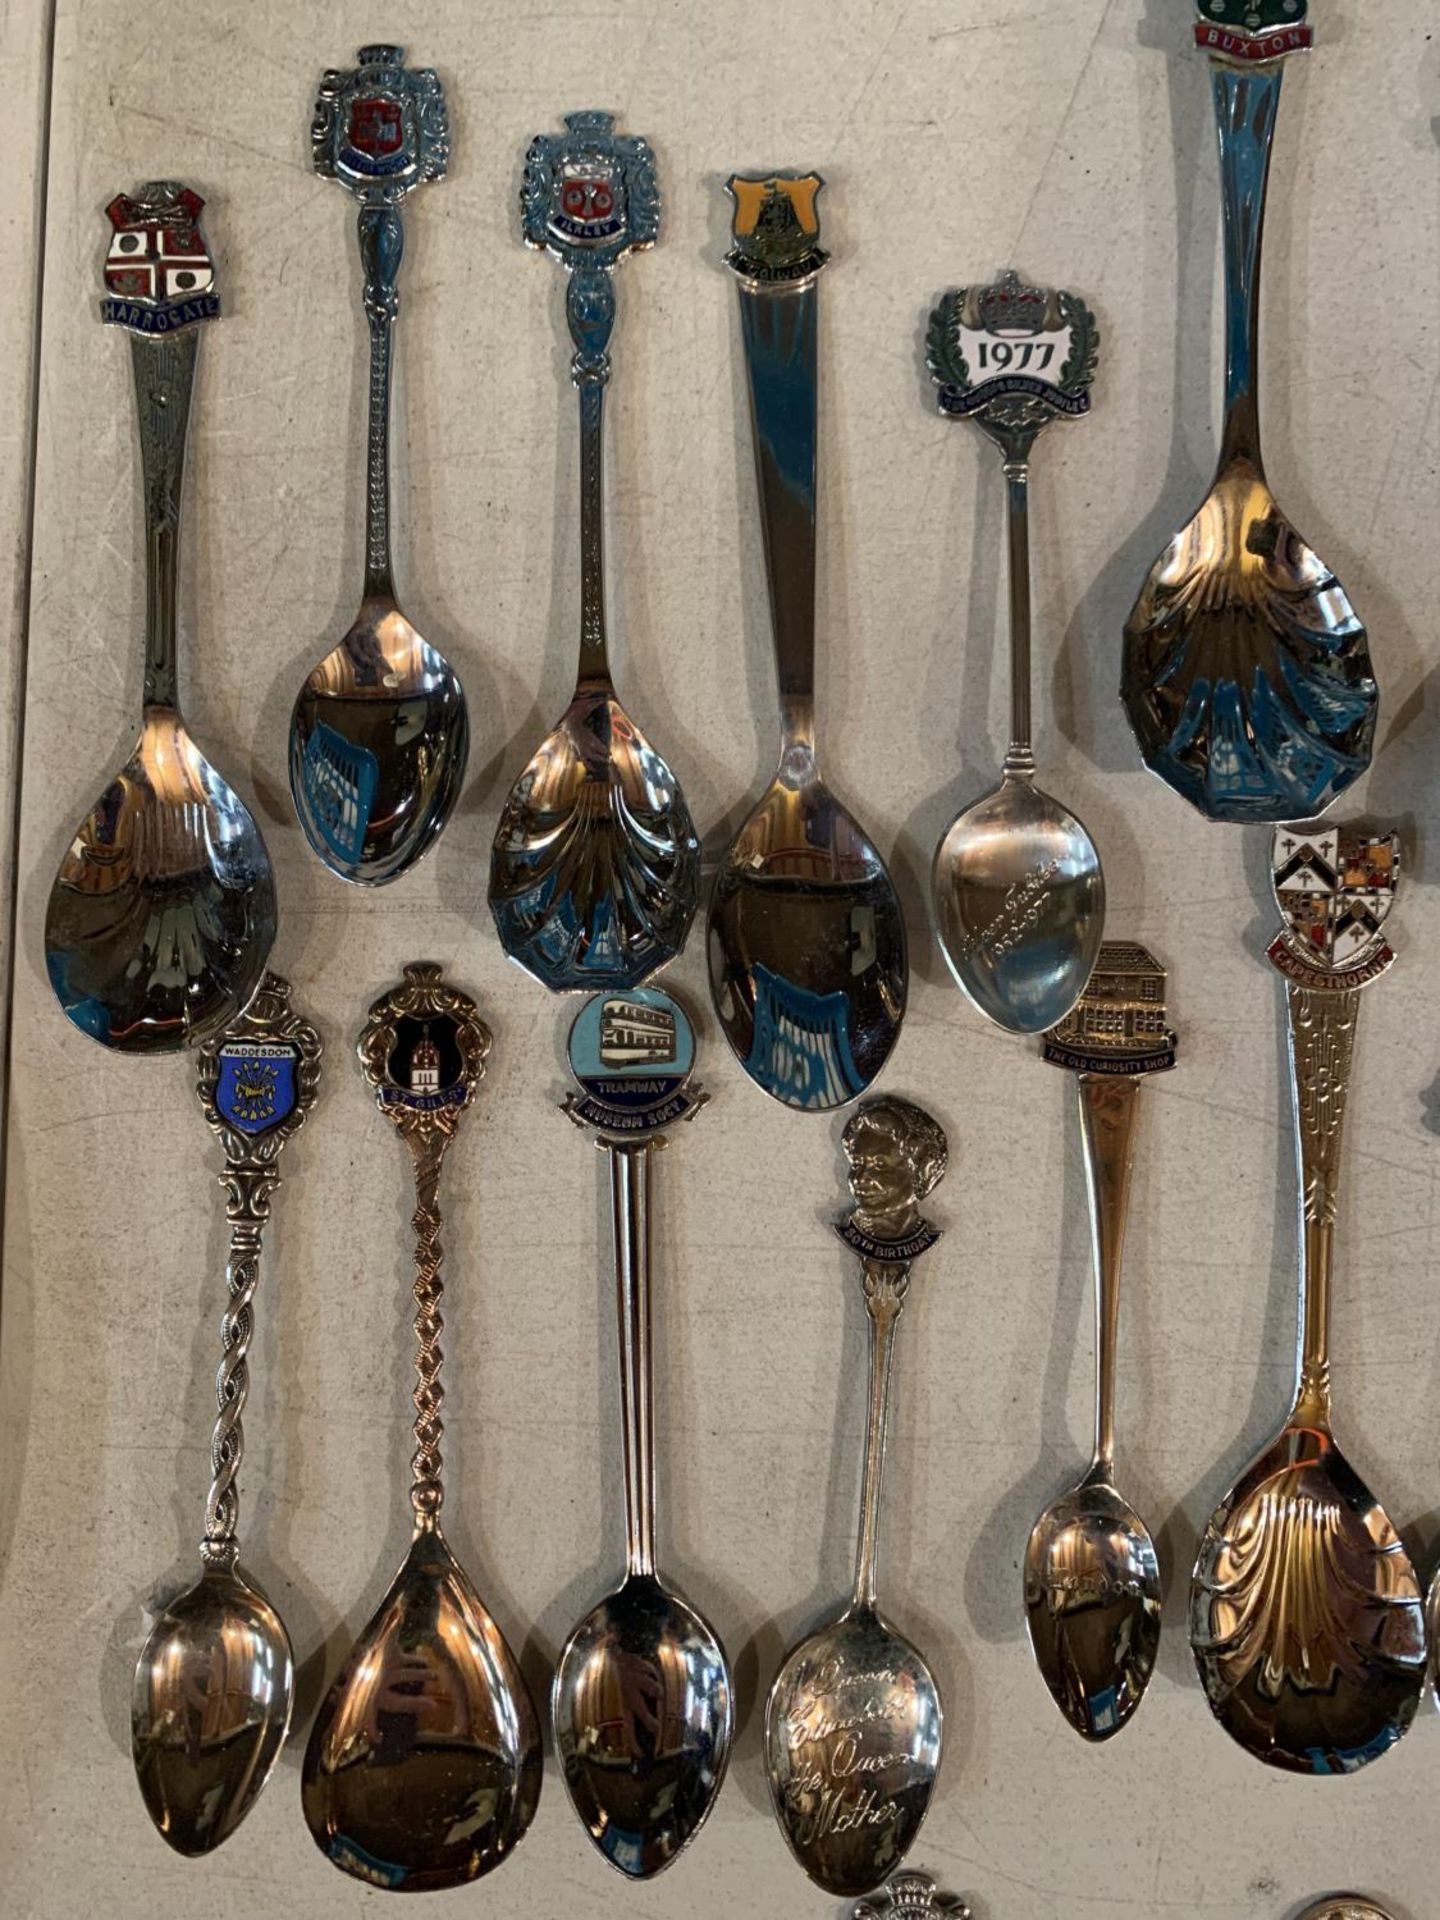 A LARGE COLLECTION OF SOUVENIR SPOONS - Image 2 of 4